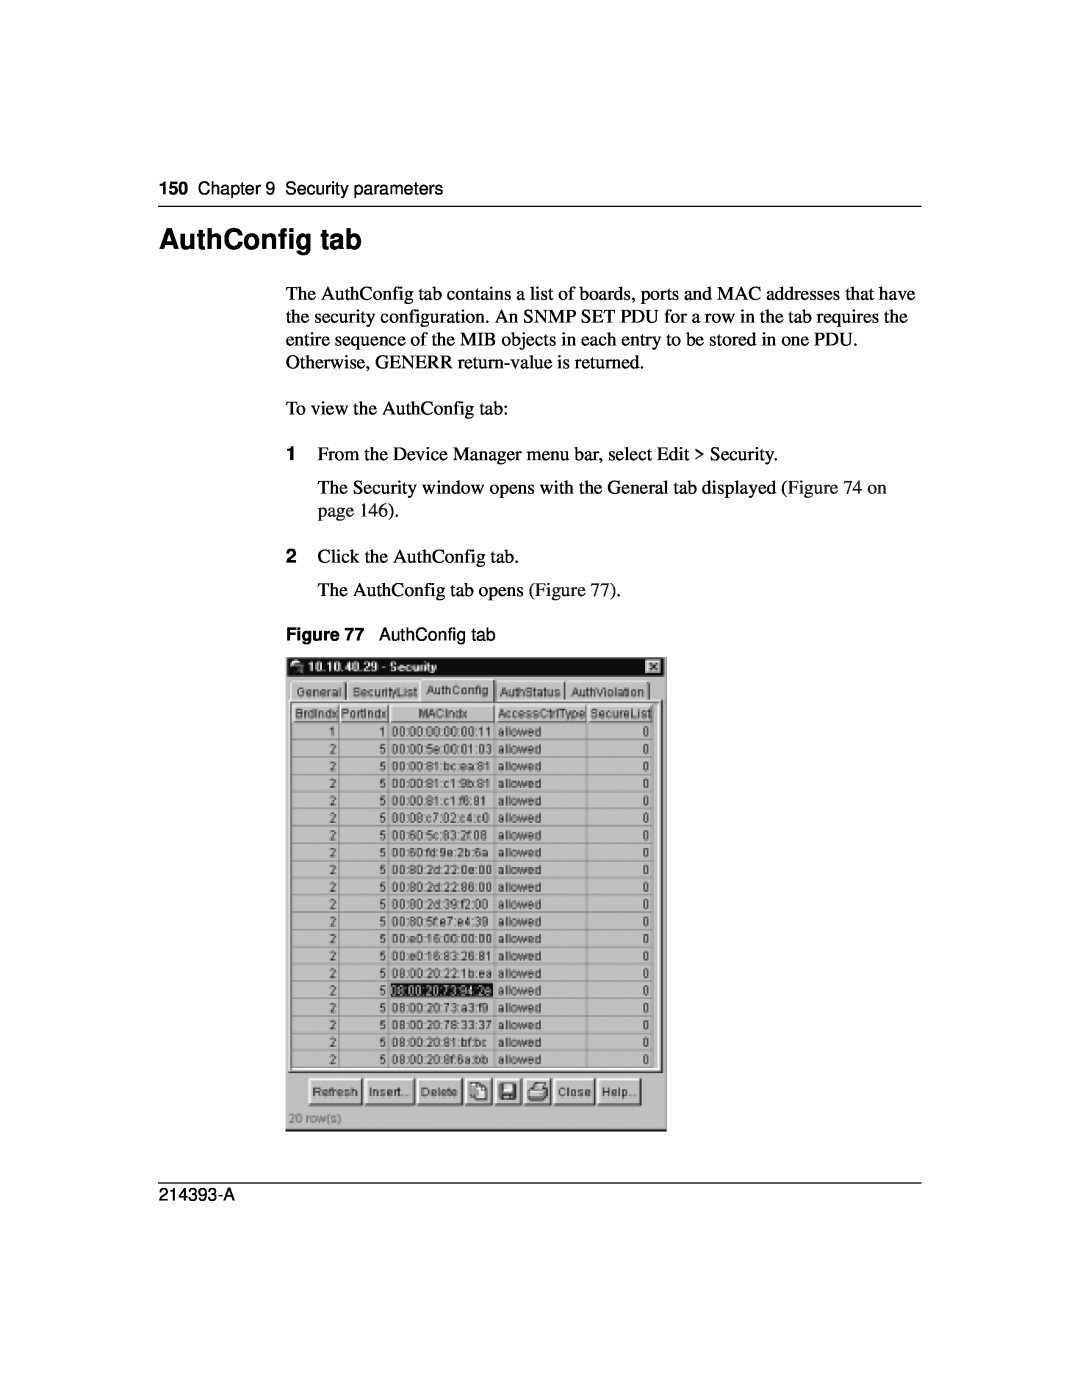 Nortel Networks 214393-A manual AuthConfig tab 